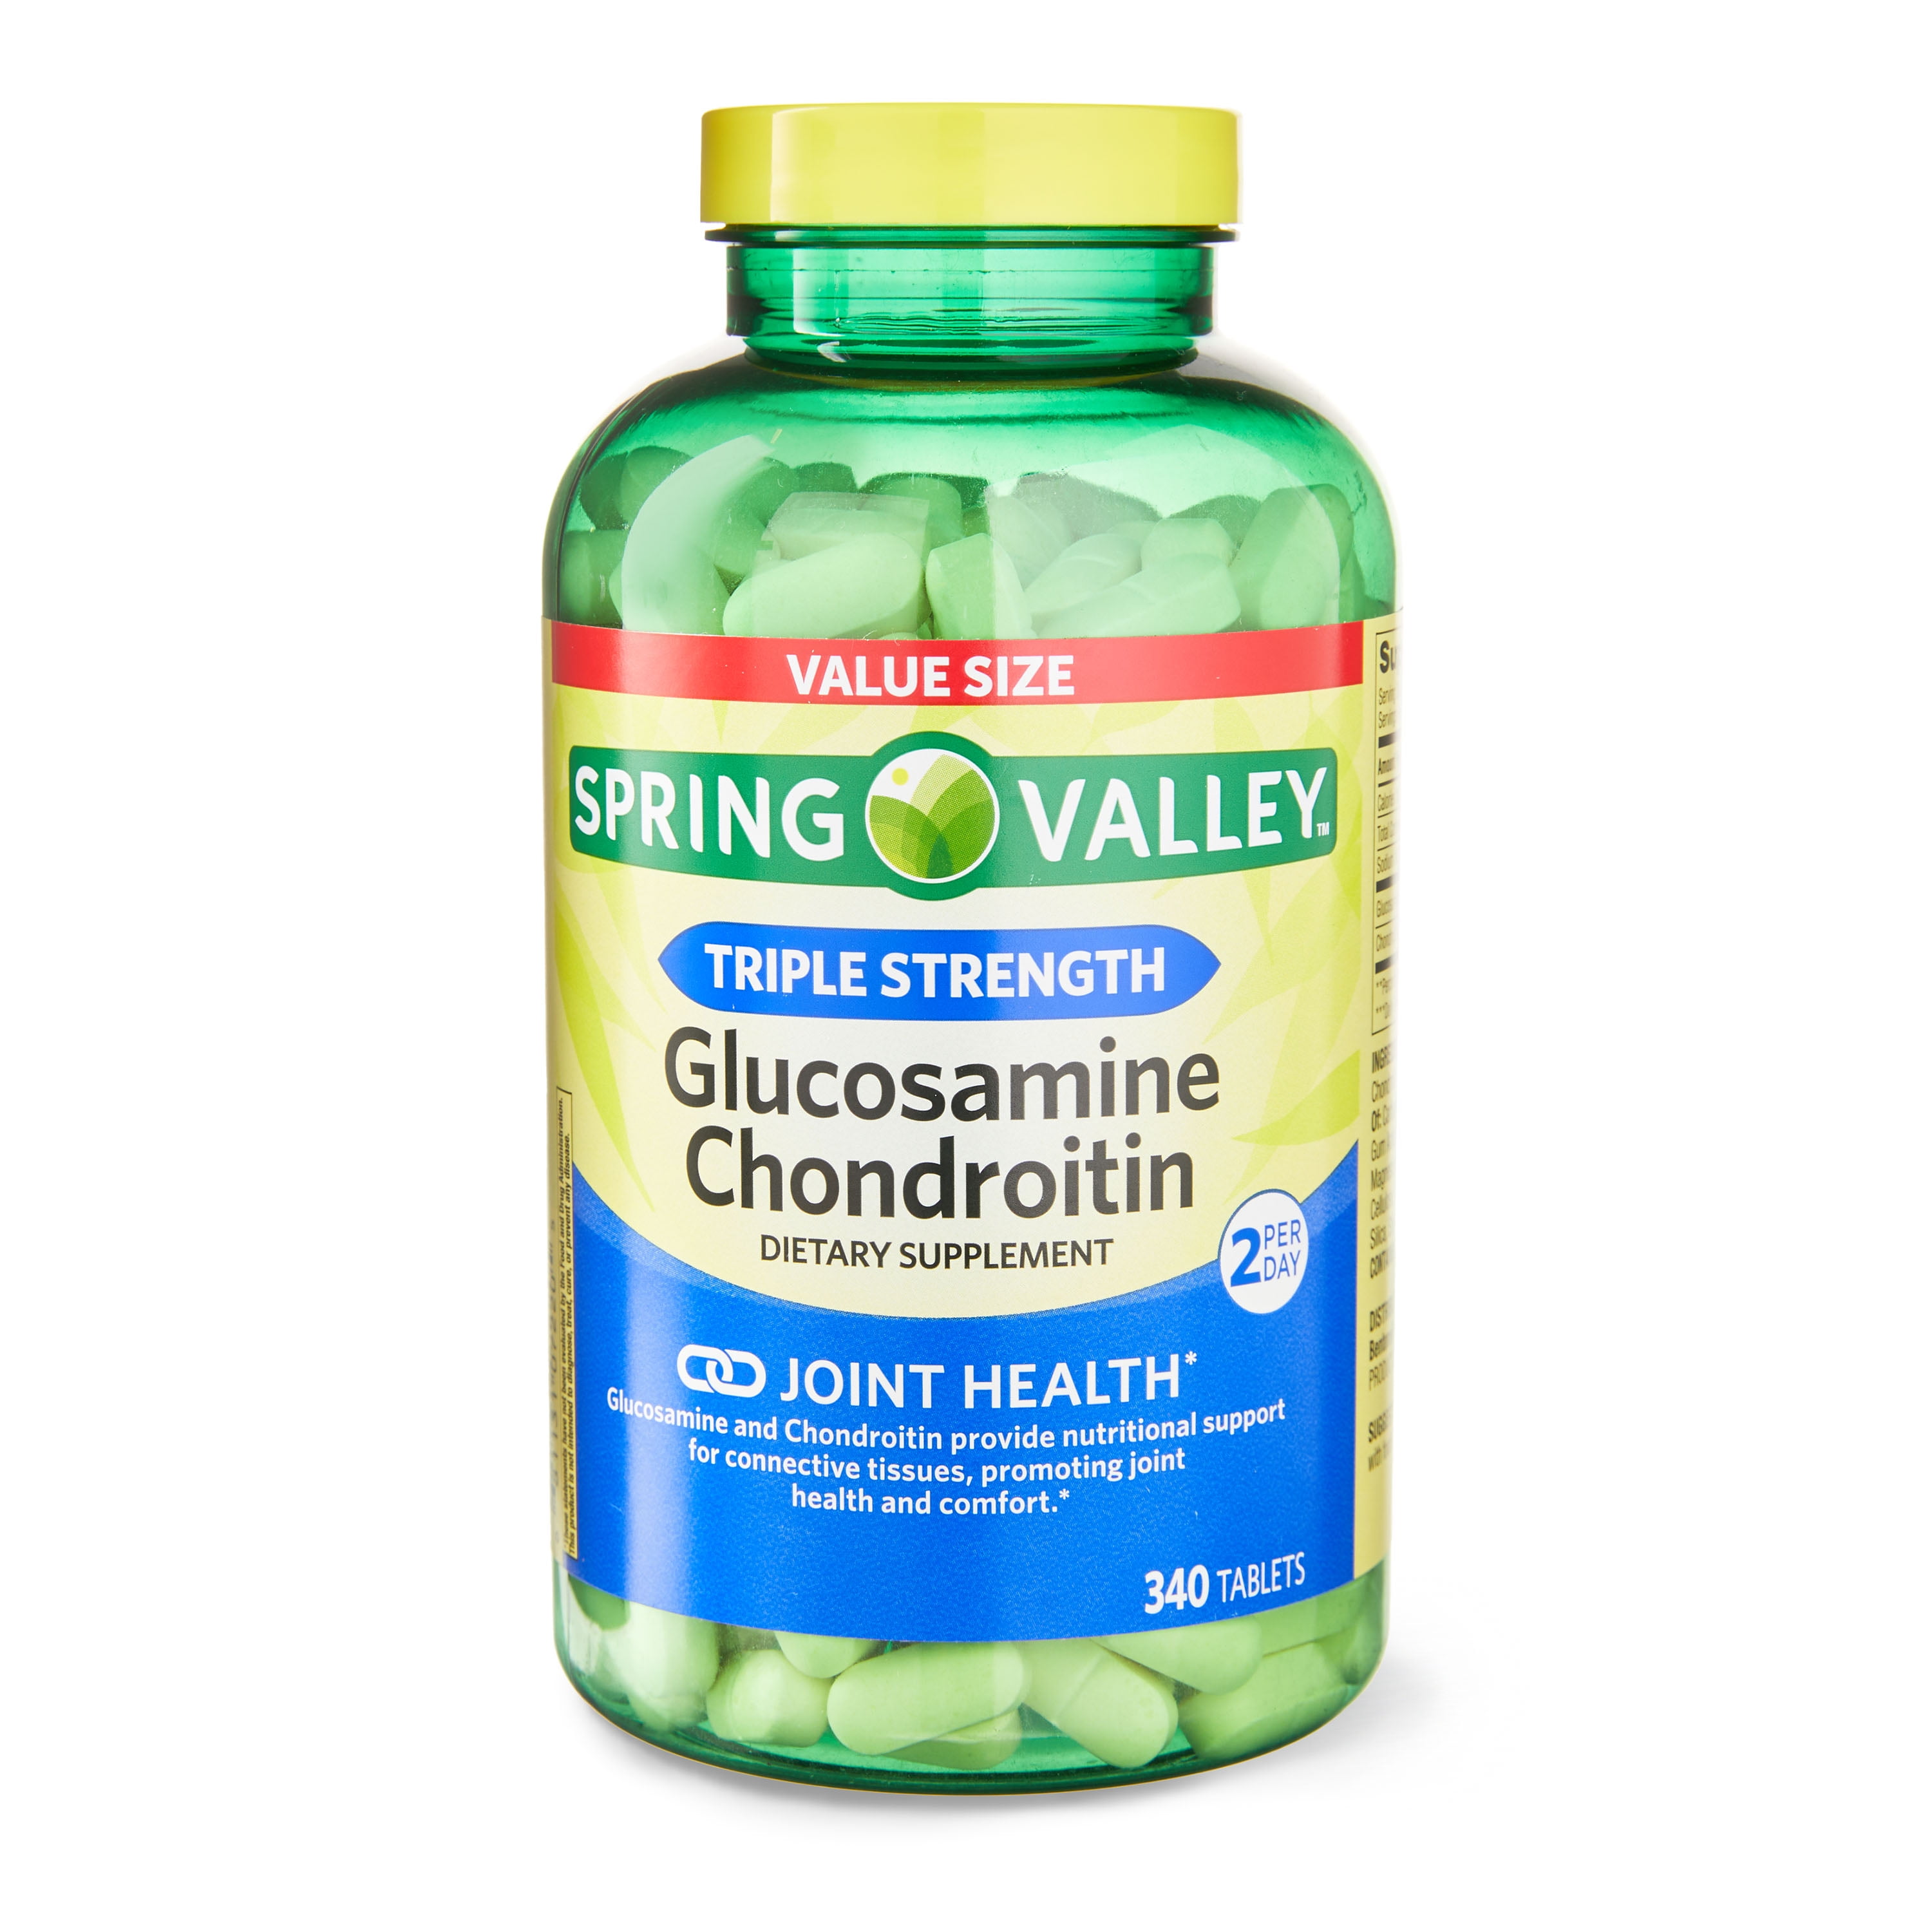 Spring Valley Triple Strength Glucosamine Chondroitin Tablets Dietary Supplement Value Size, 340 Count